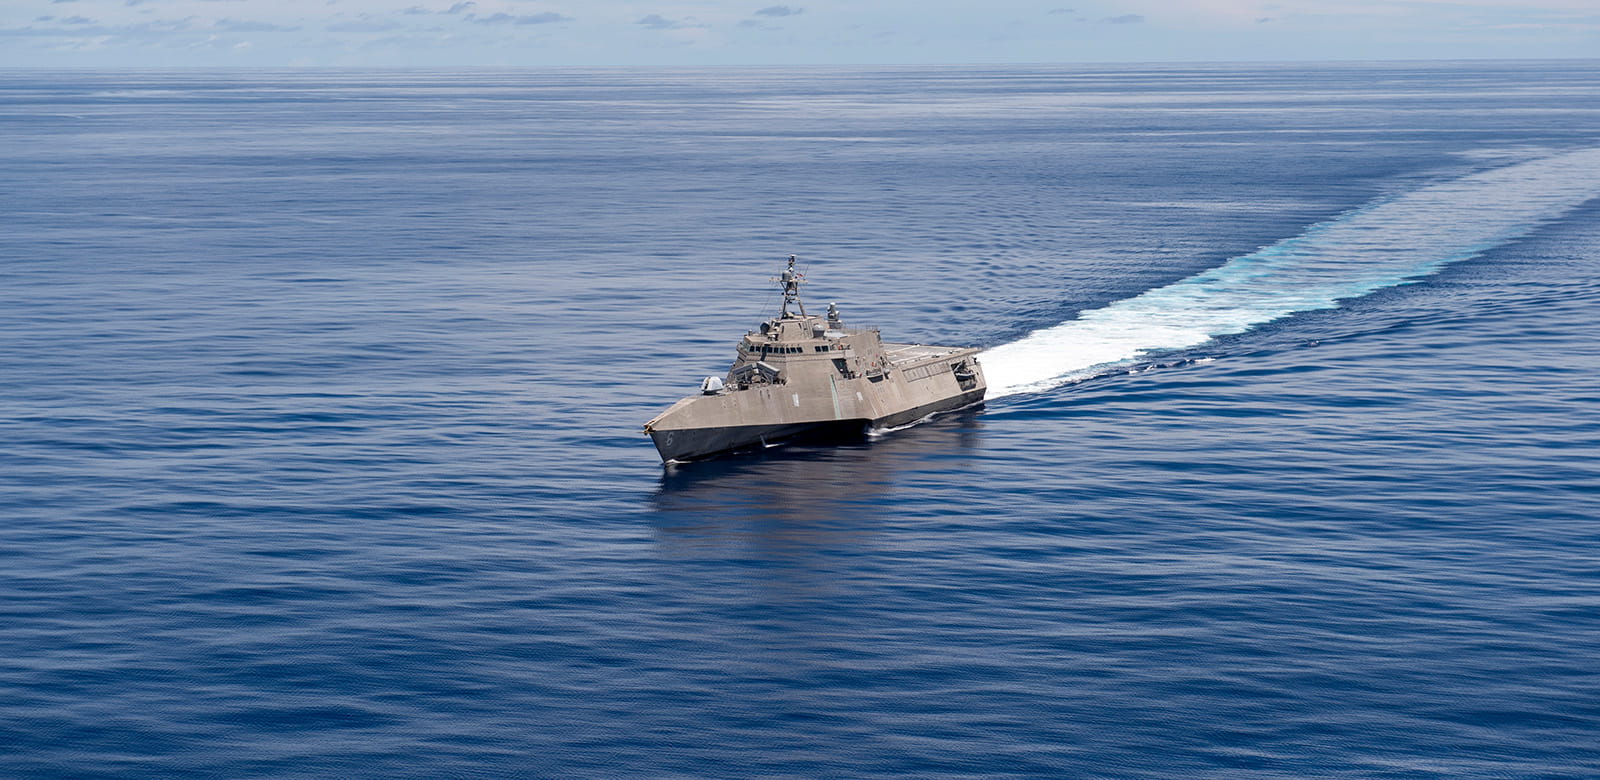 The Independence-variant littoral combat ship USS Jackson (LCS 6) transits the Pacific Ocean. AN/AQS-20C is designated as the mine-hunting sonar for U.S. Navy’s LCS’ mine countermeasure mission package. (U.S. Navy photo)